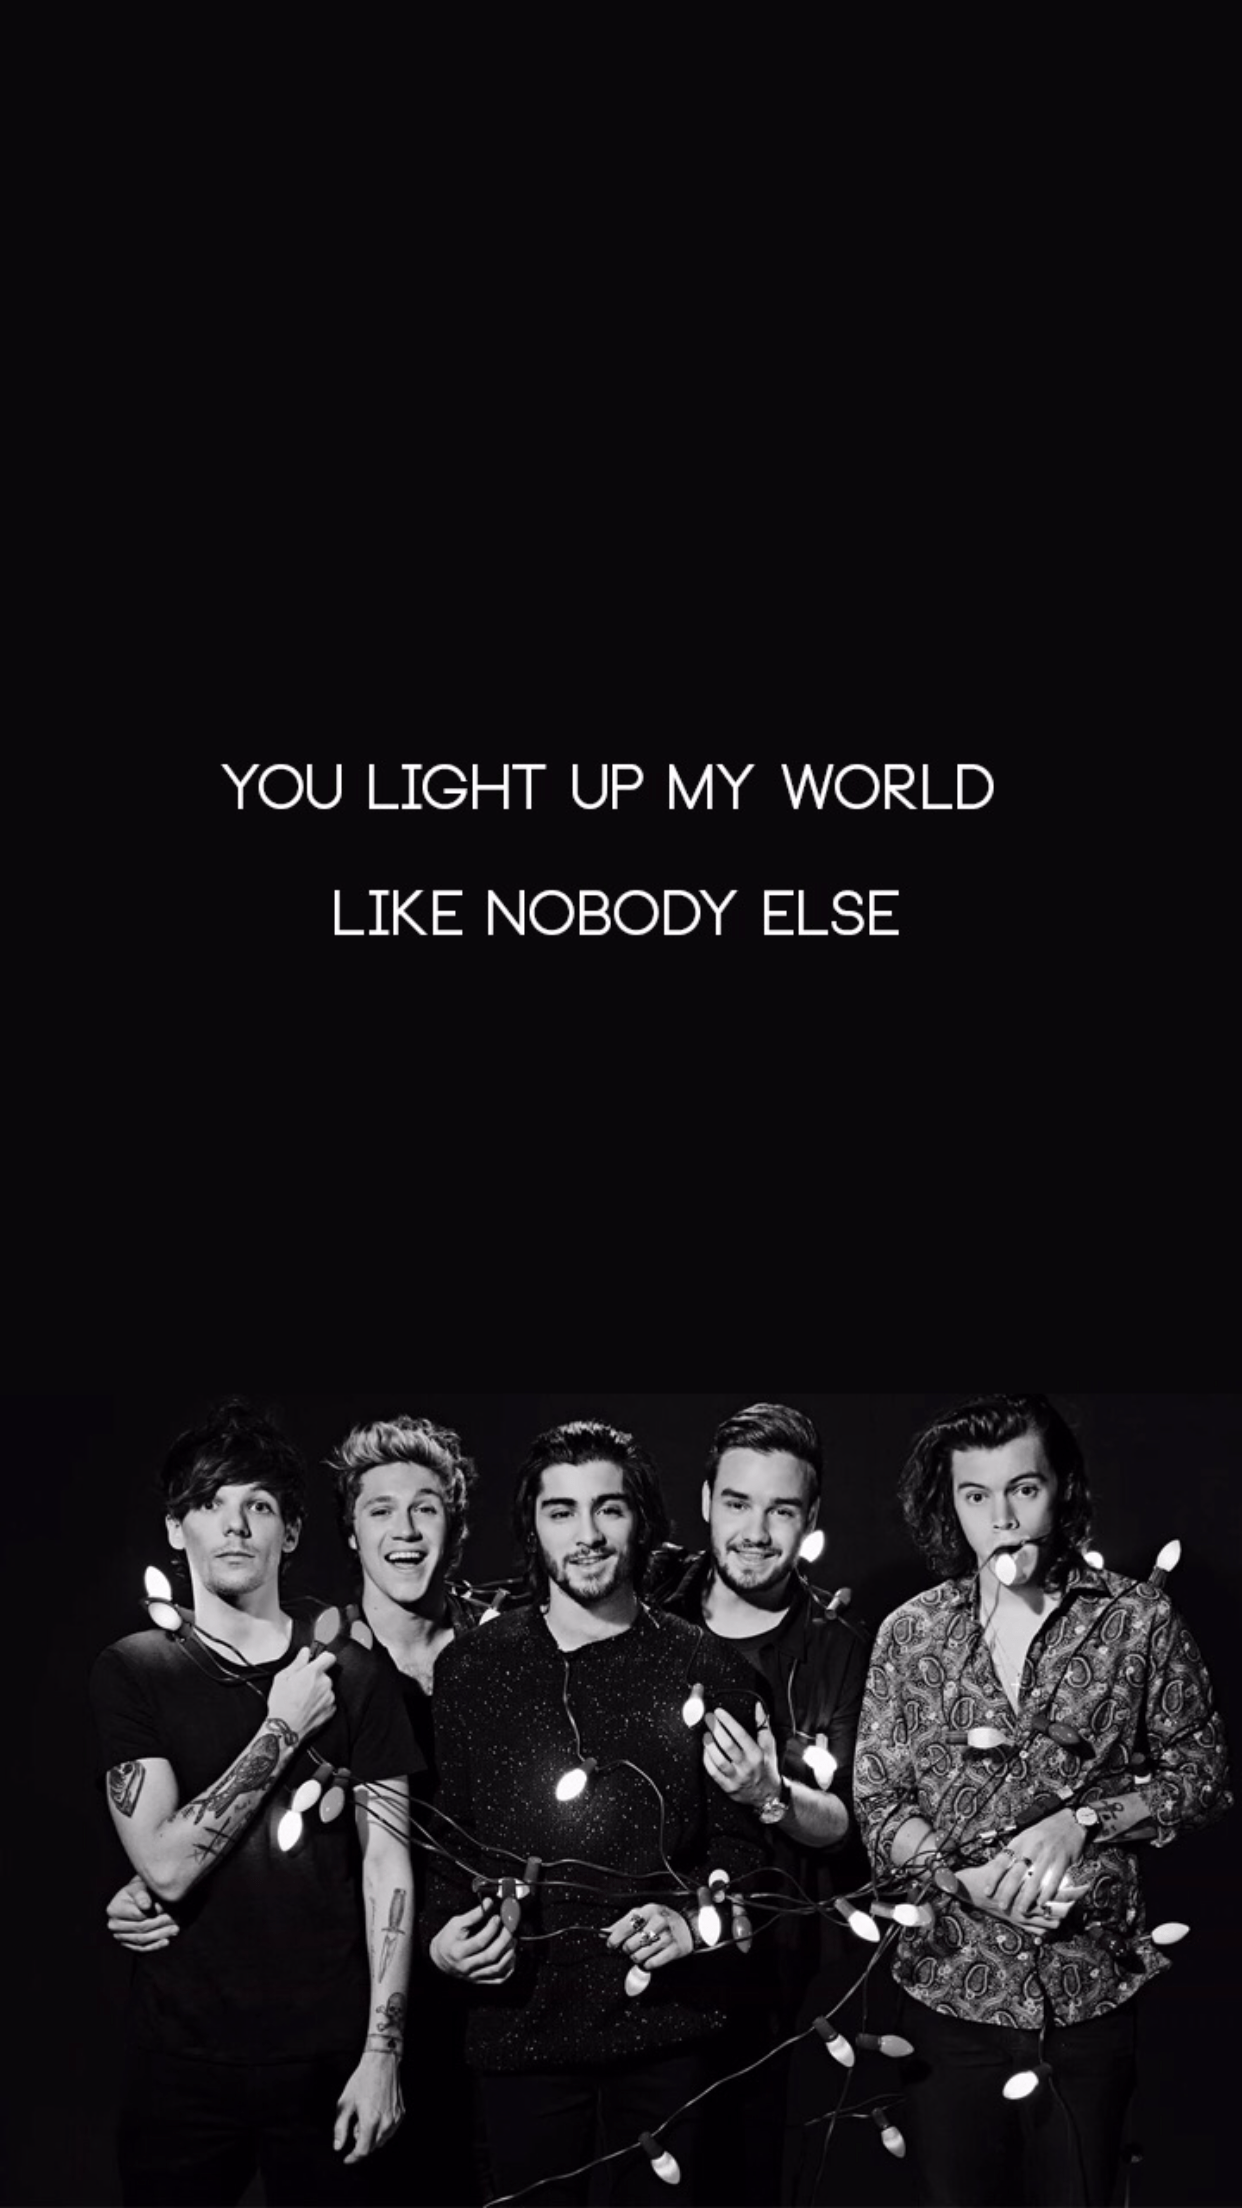 One Direction wallpaper for iPhone 6. You light up my world like nobody else - One Direction